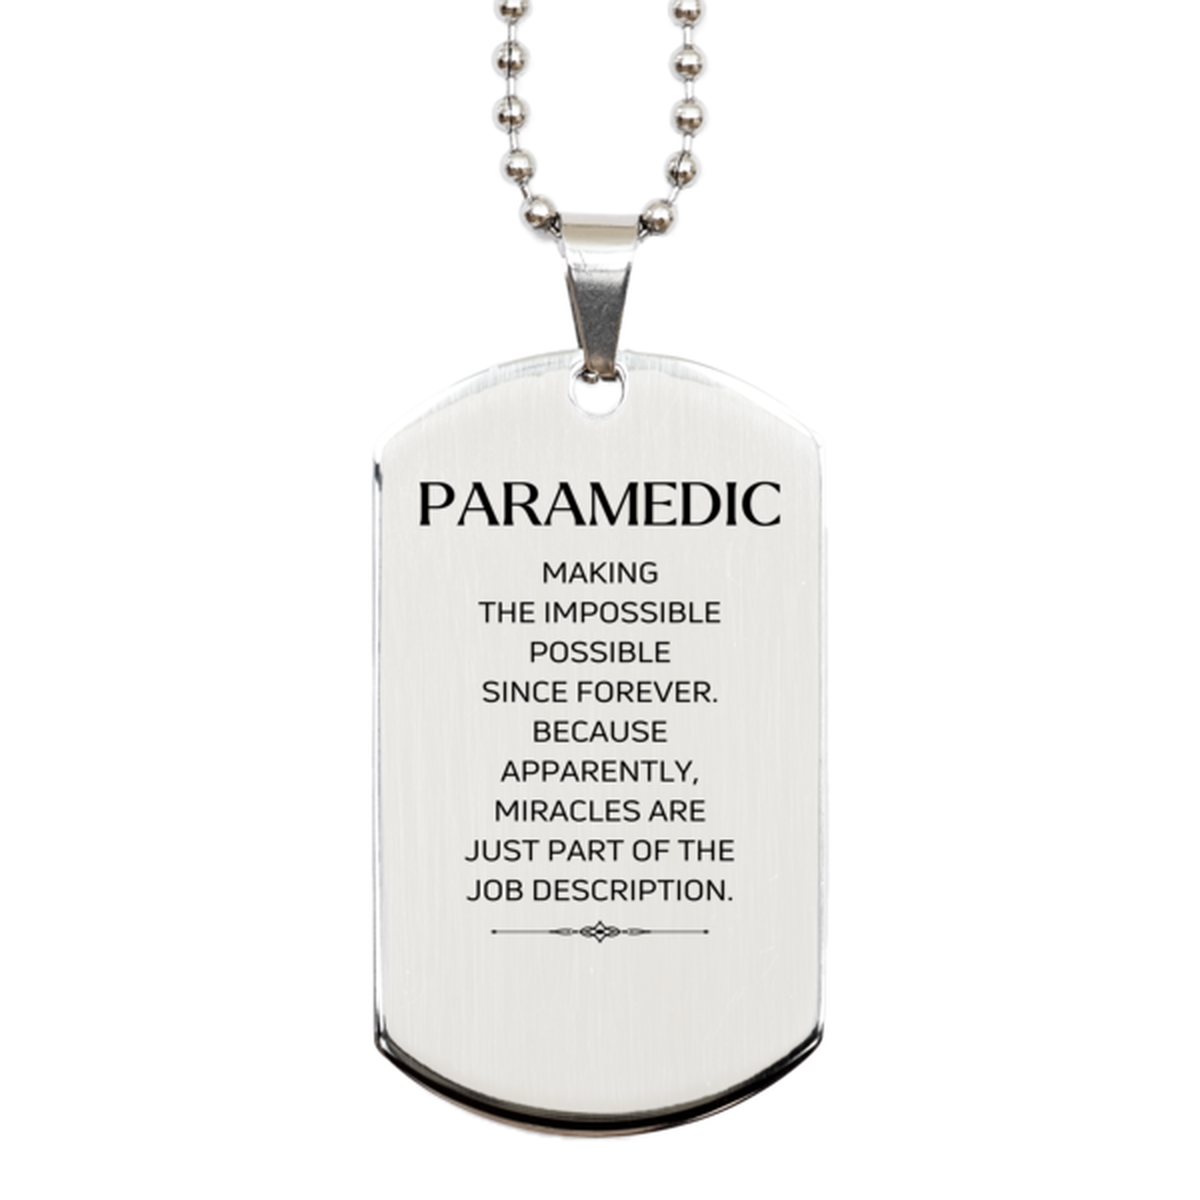 Funny Paramedic Gifts, Miracles are just part of the job description, Inspirational Birthday Silver Dog Tag For Paramedic, Men, Women, Coworkers, Friends, Boss